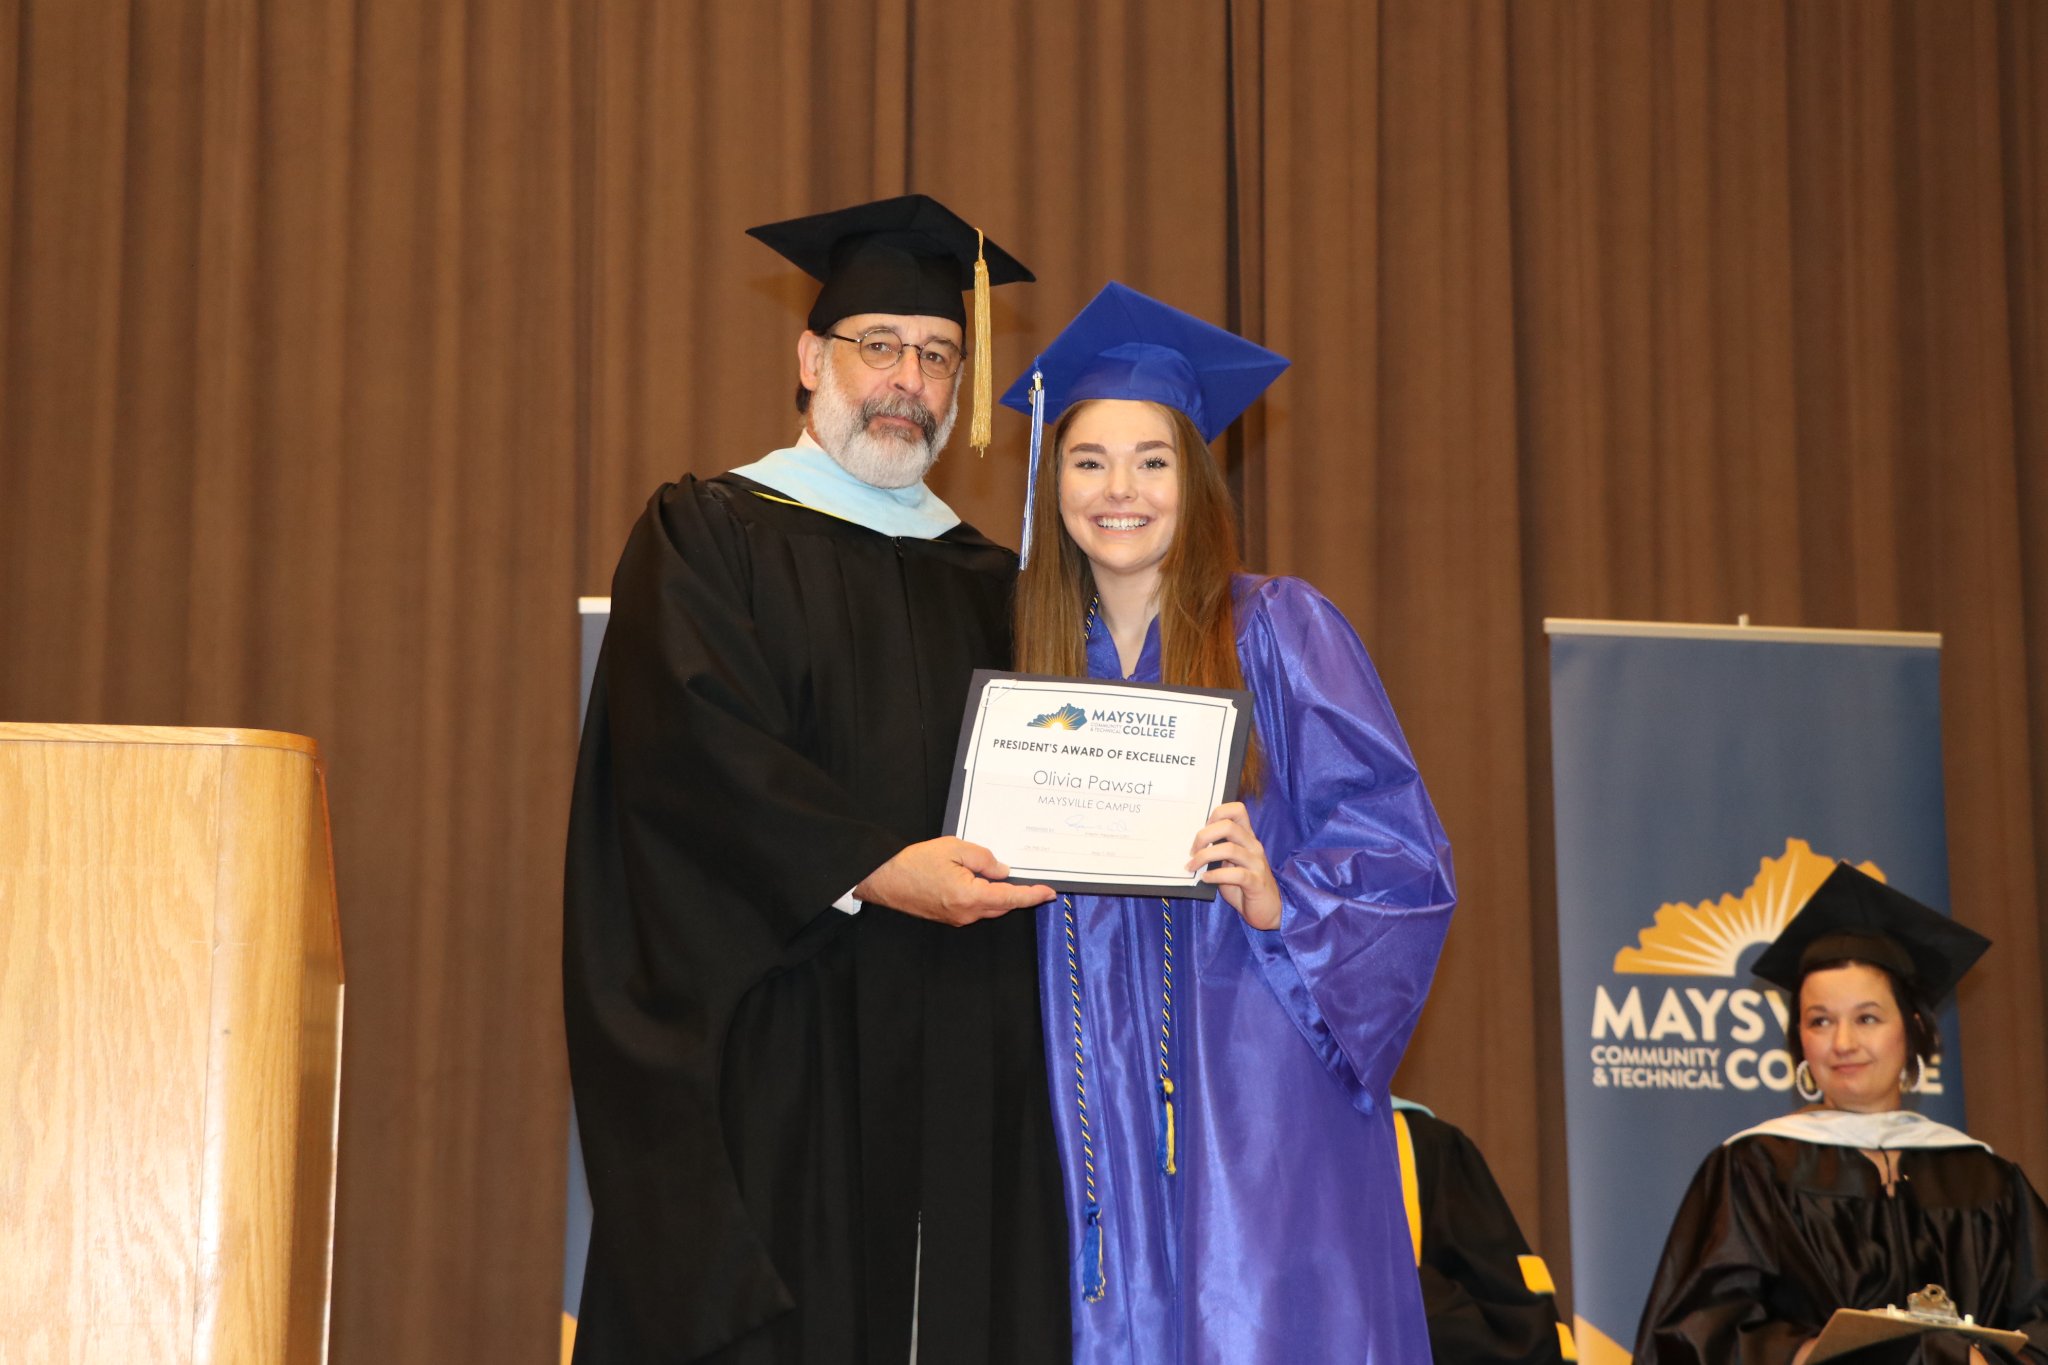 Maysville President's Award of Excellence Recipient Pawsat at graduation.